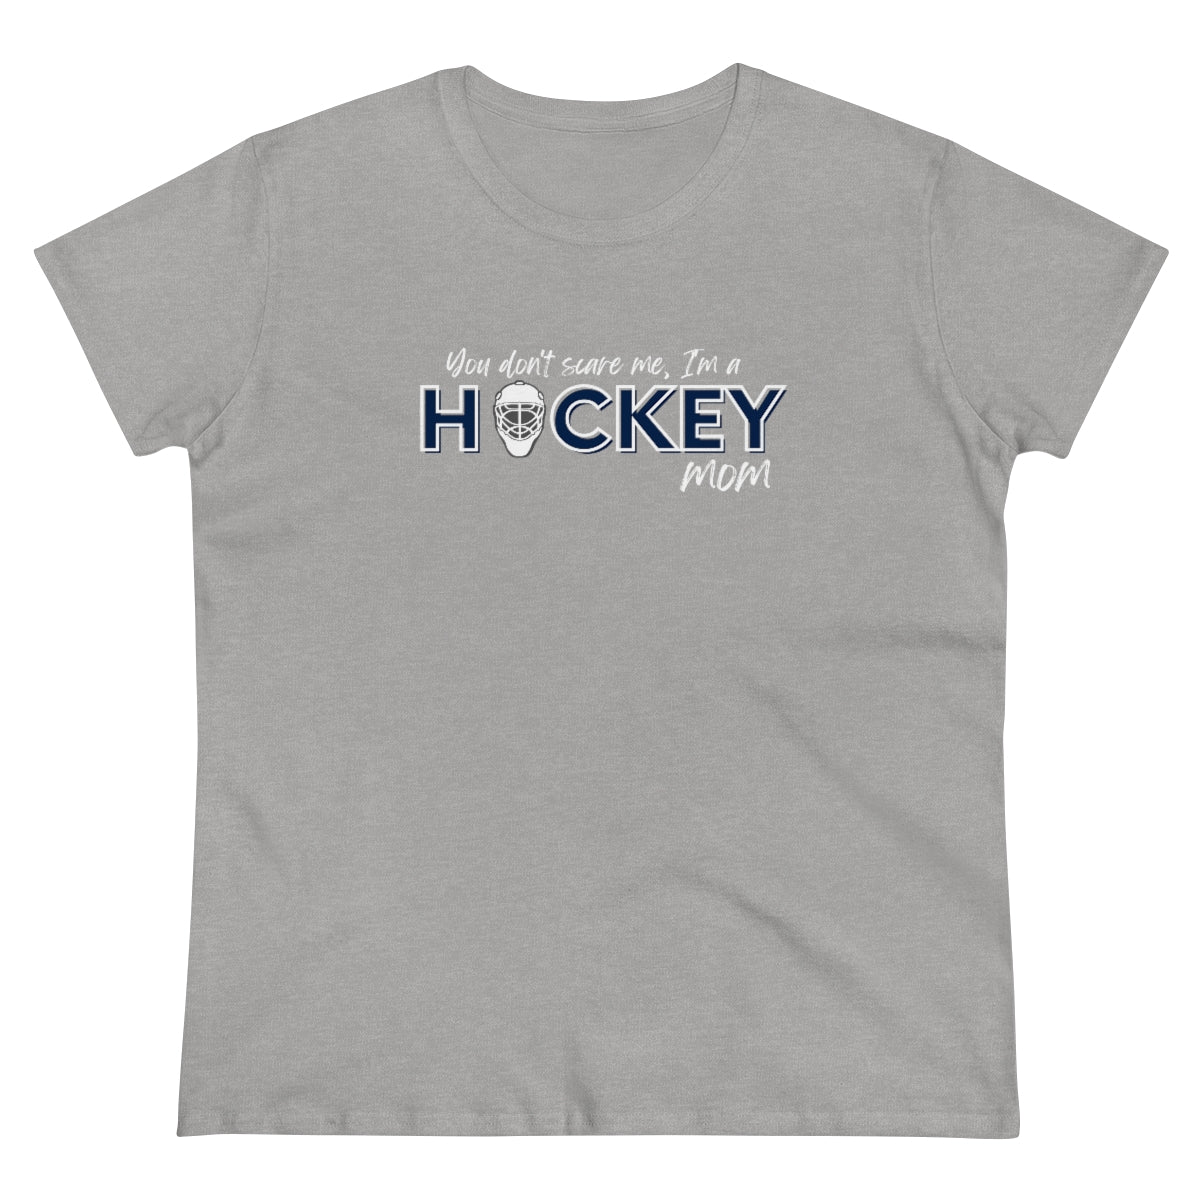 You don't scare me, I'm a Hockey Mom - Ladies Tee